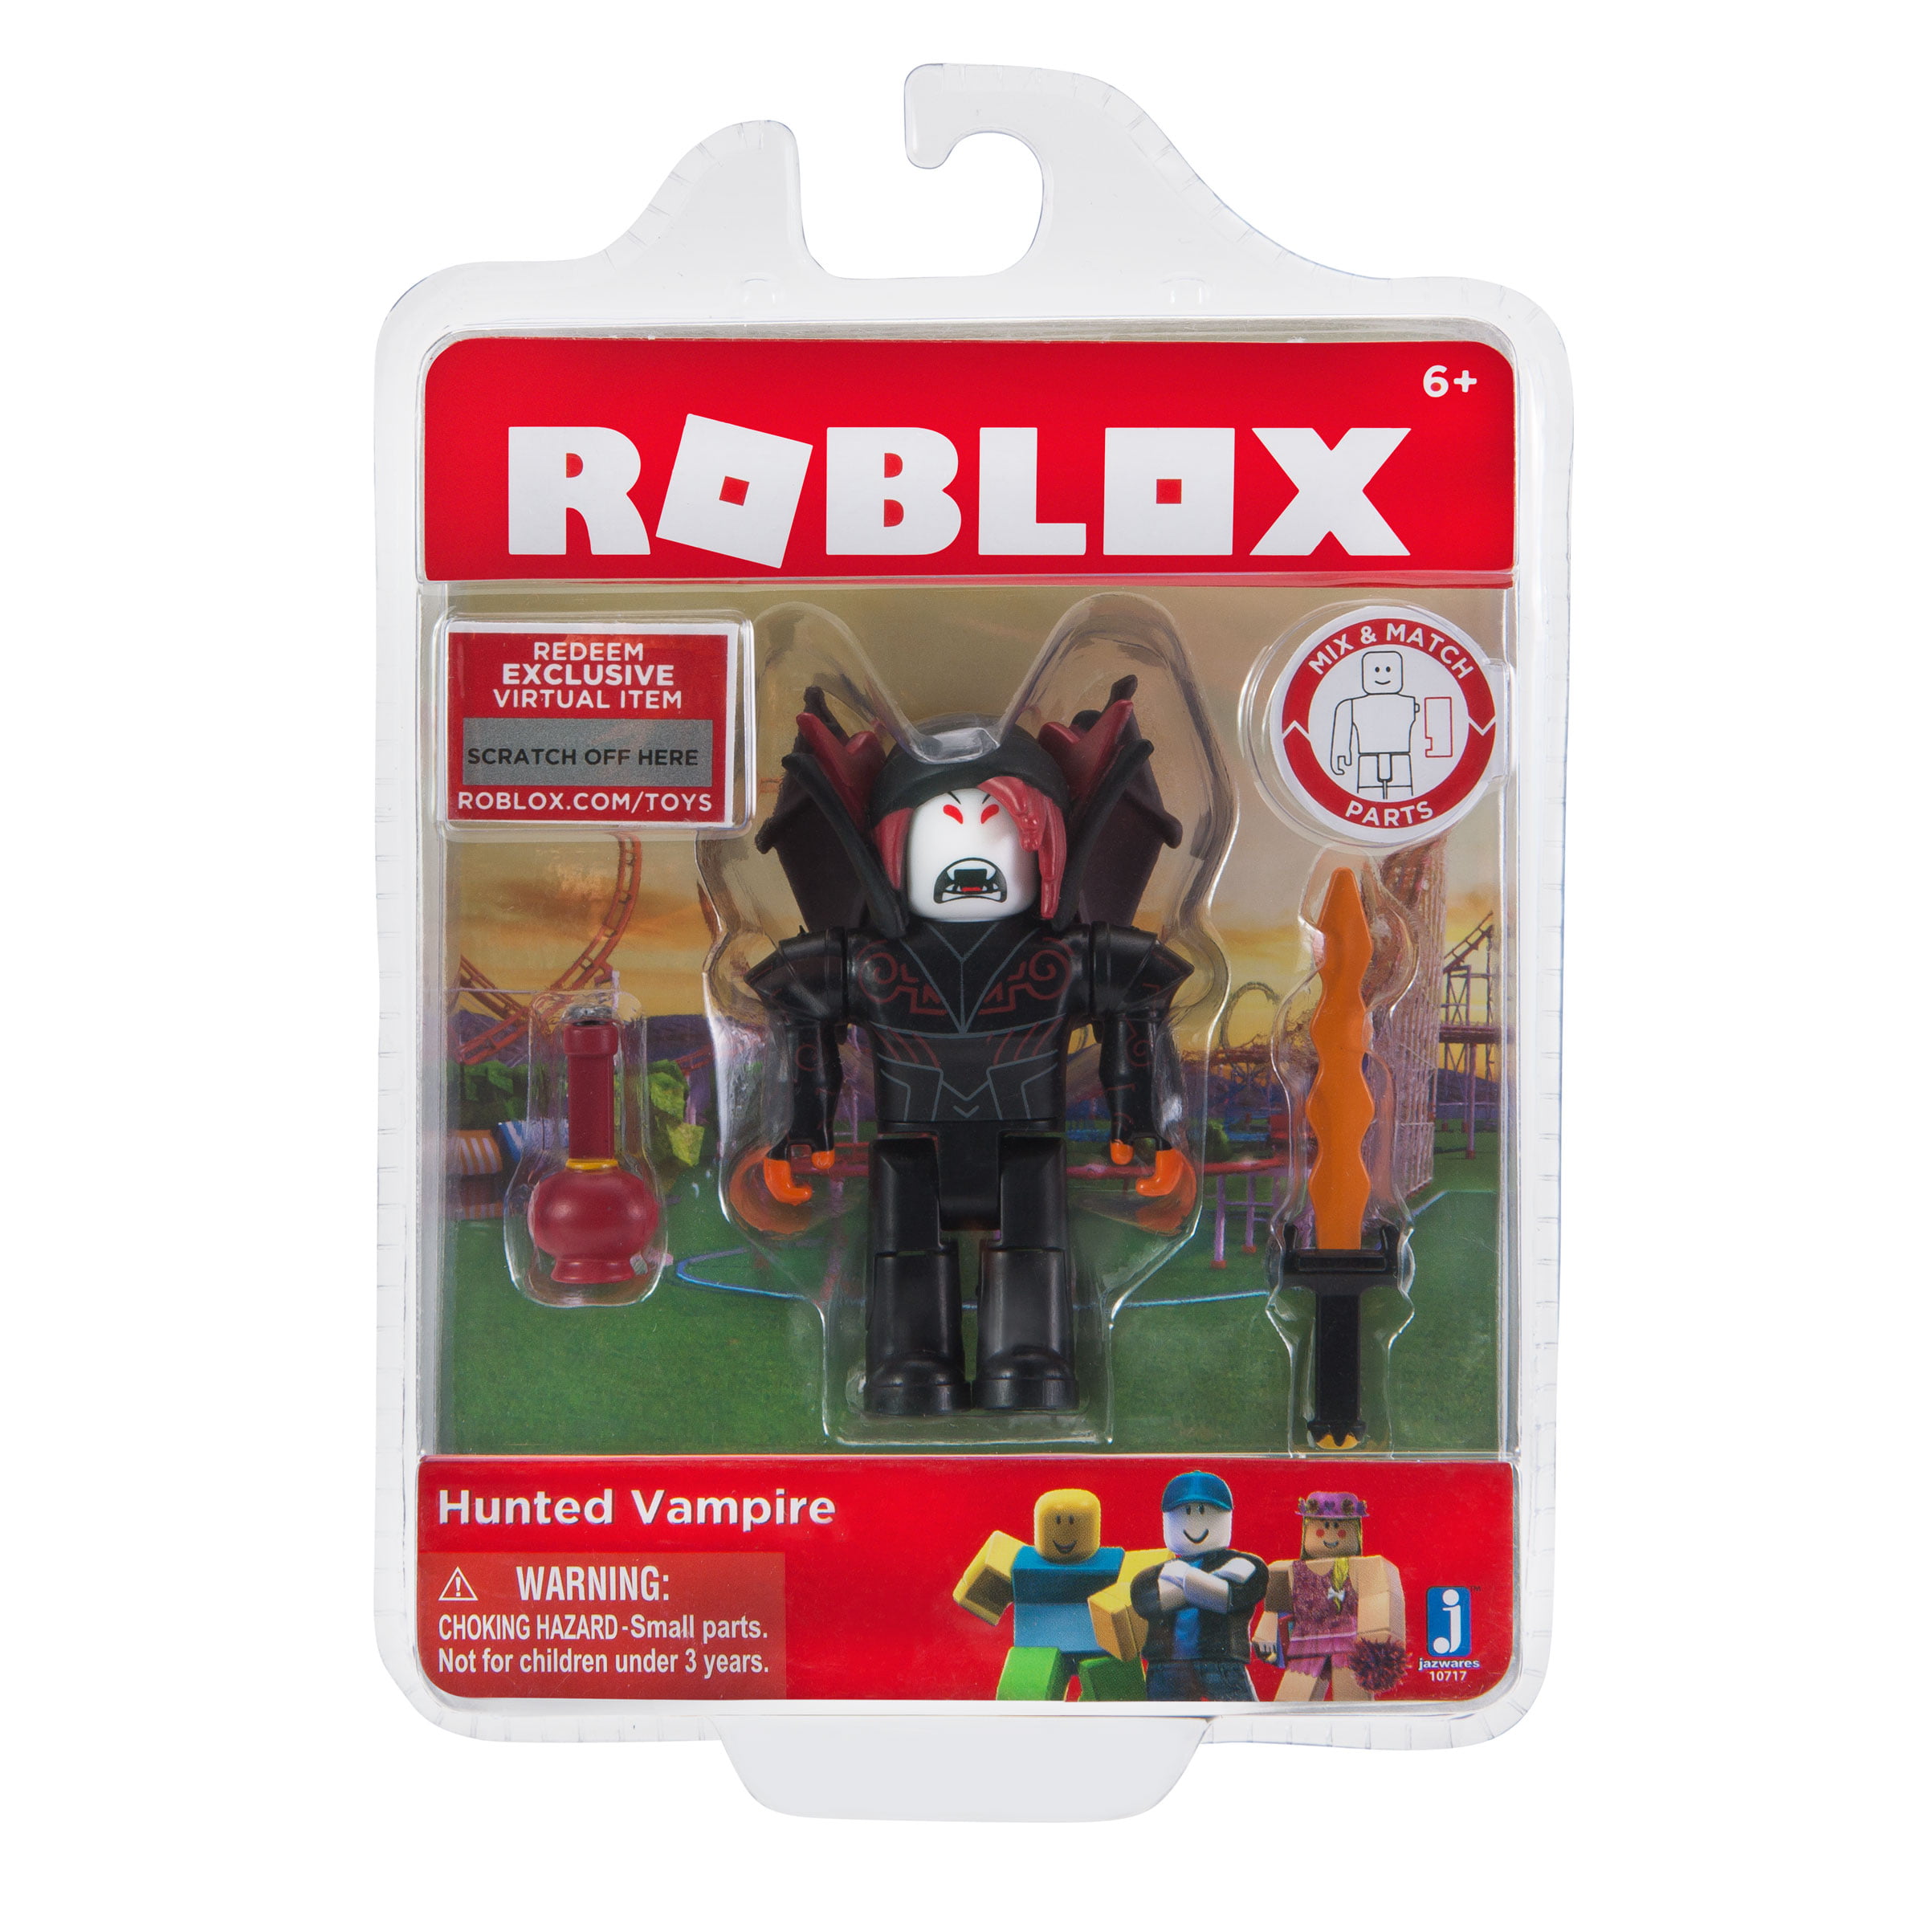 Roblox Action Collection Hunted Vampire Figure Pack Includes Exclusive Virtual Item Walmart Com Walmart Com - vampire hunters 2 roblox fan art